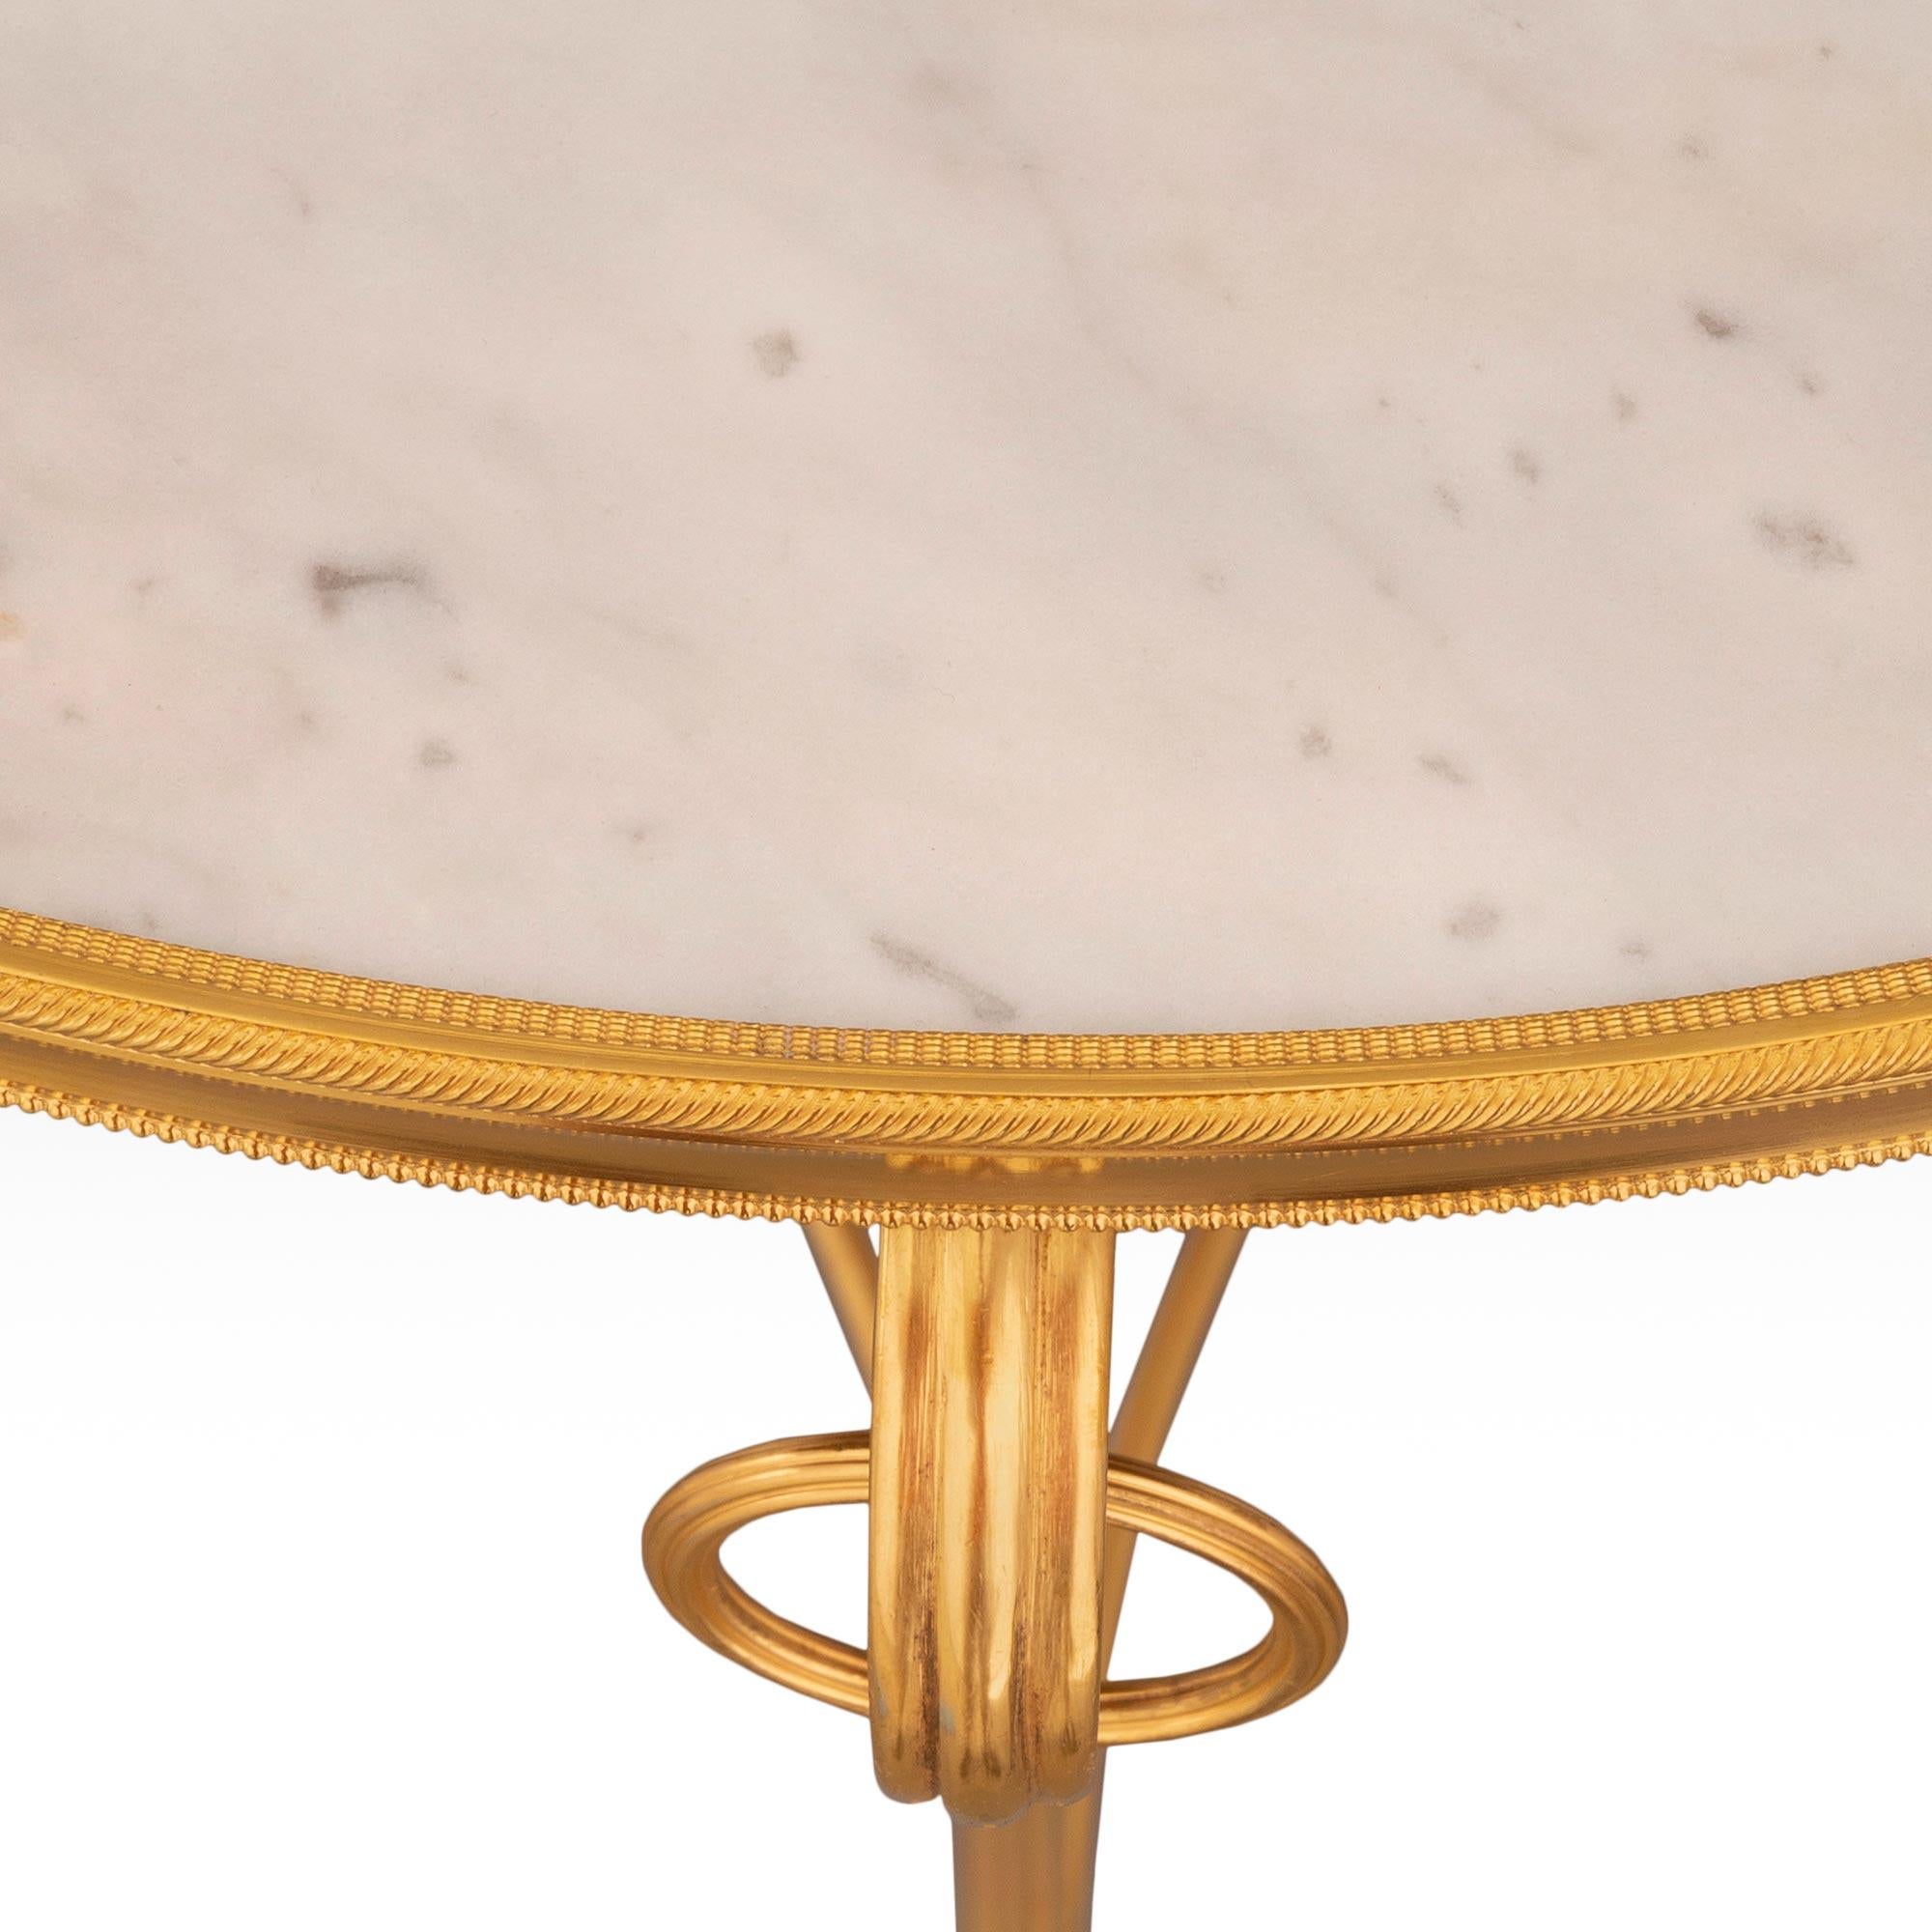 French 19th Century Neoclassical Style Ormolu and Marble Gueridon Side Table For Sale 2